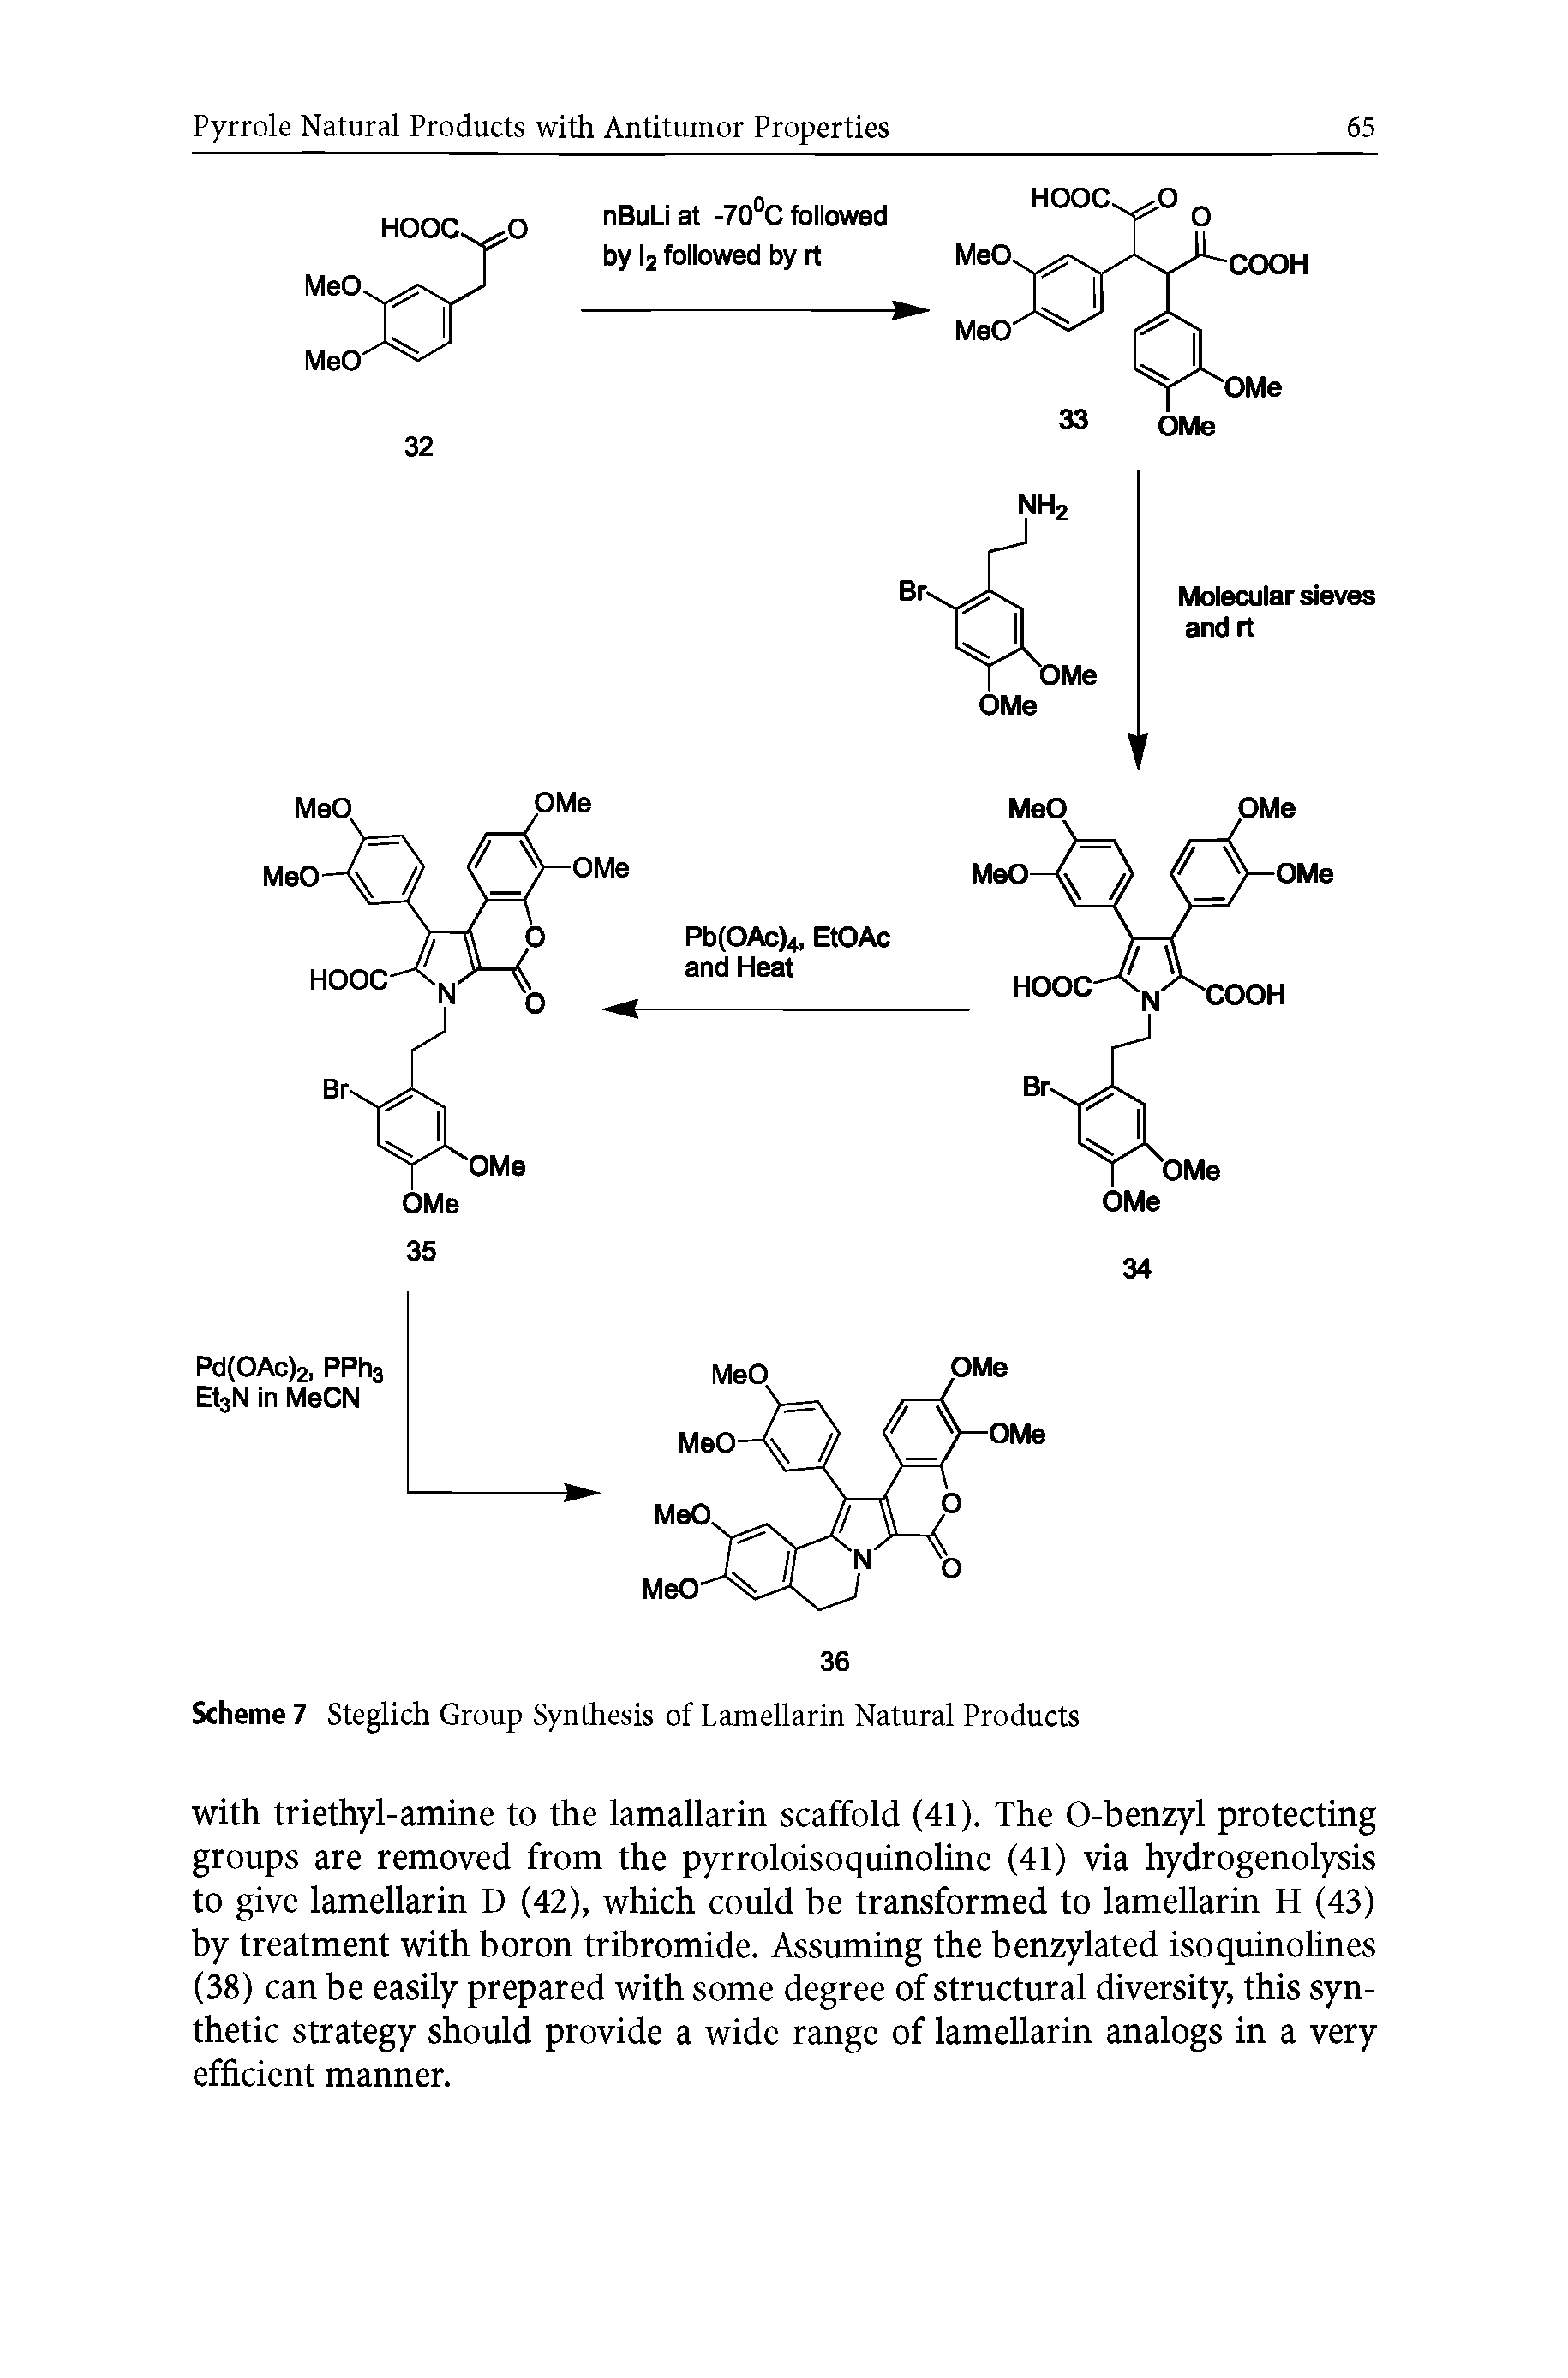 Scheme 7 Steglich Group Synthesis of Lamellarin Natural Products...